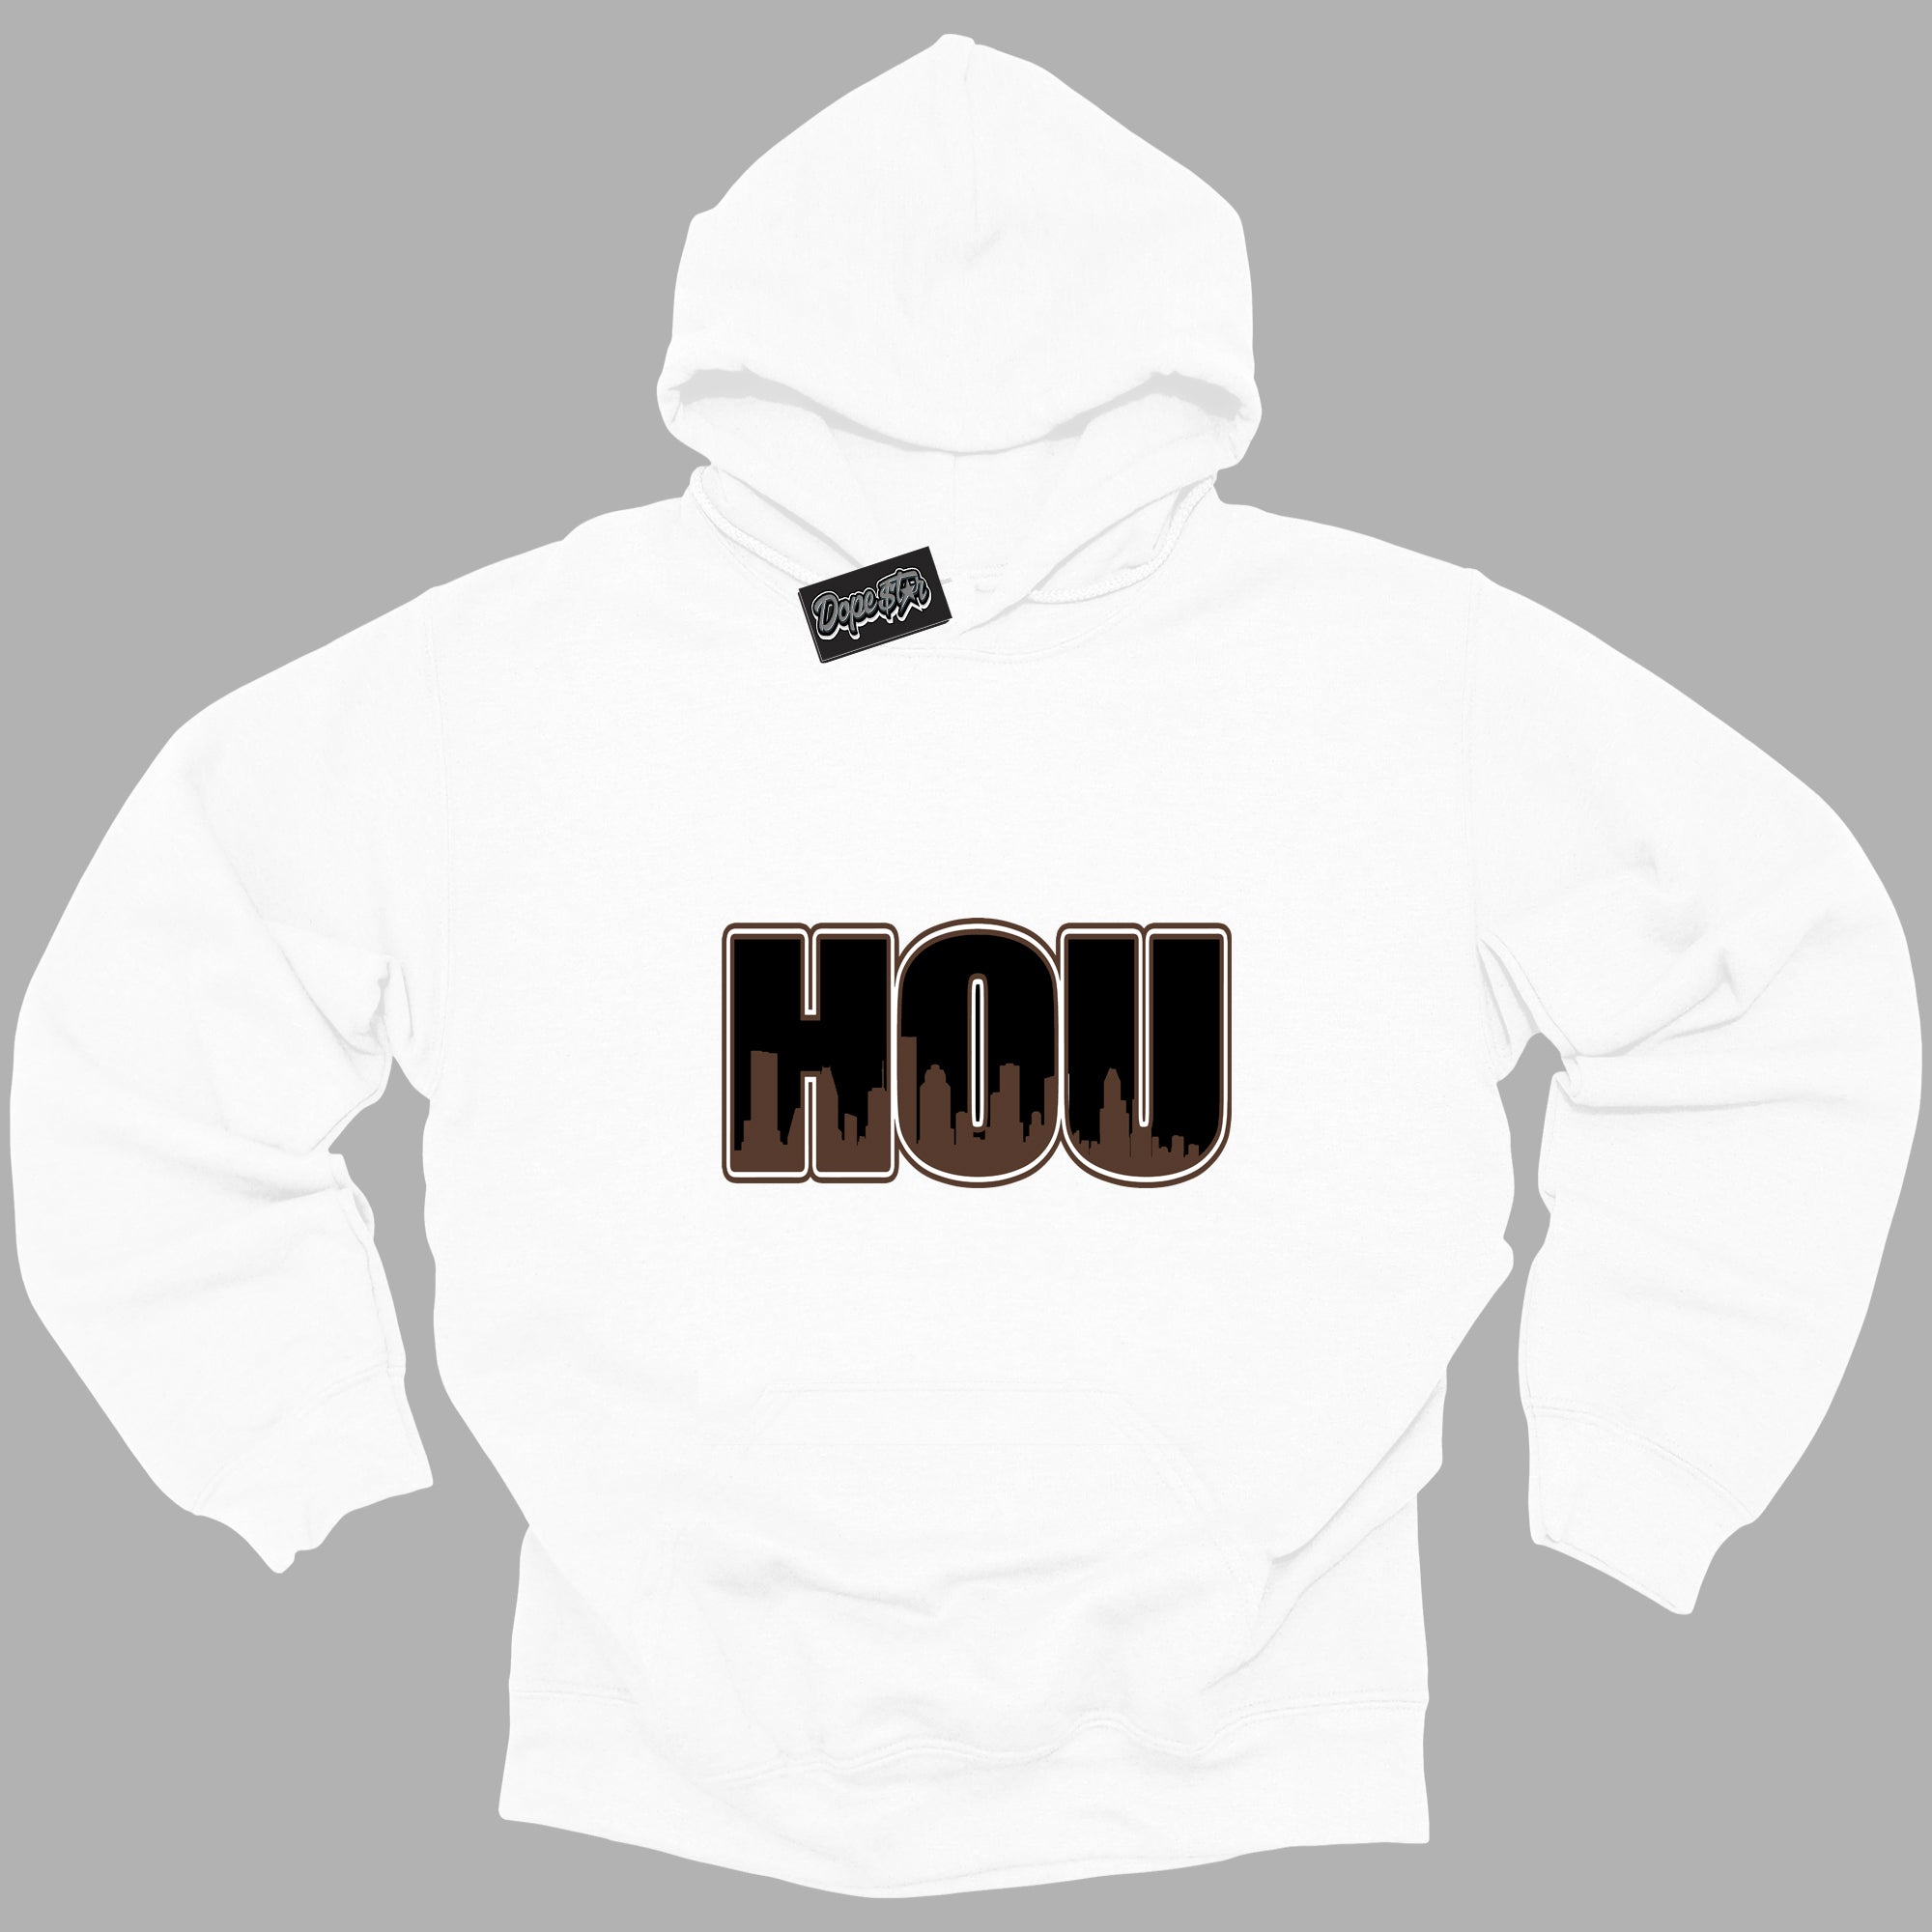 Cool White Graphic DopeStar Hoodie with “ Houston “ print, that perfectly matches Palomino 1s sneakers